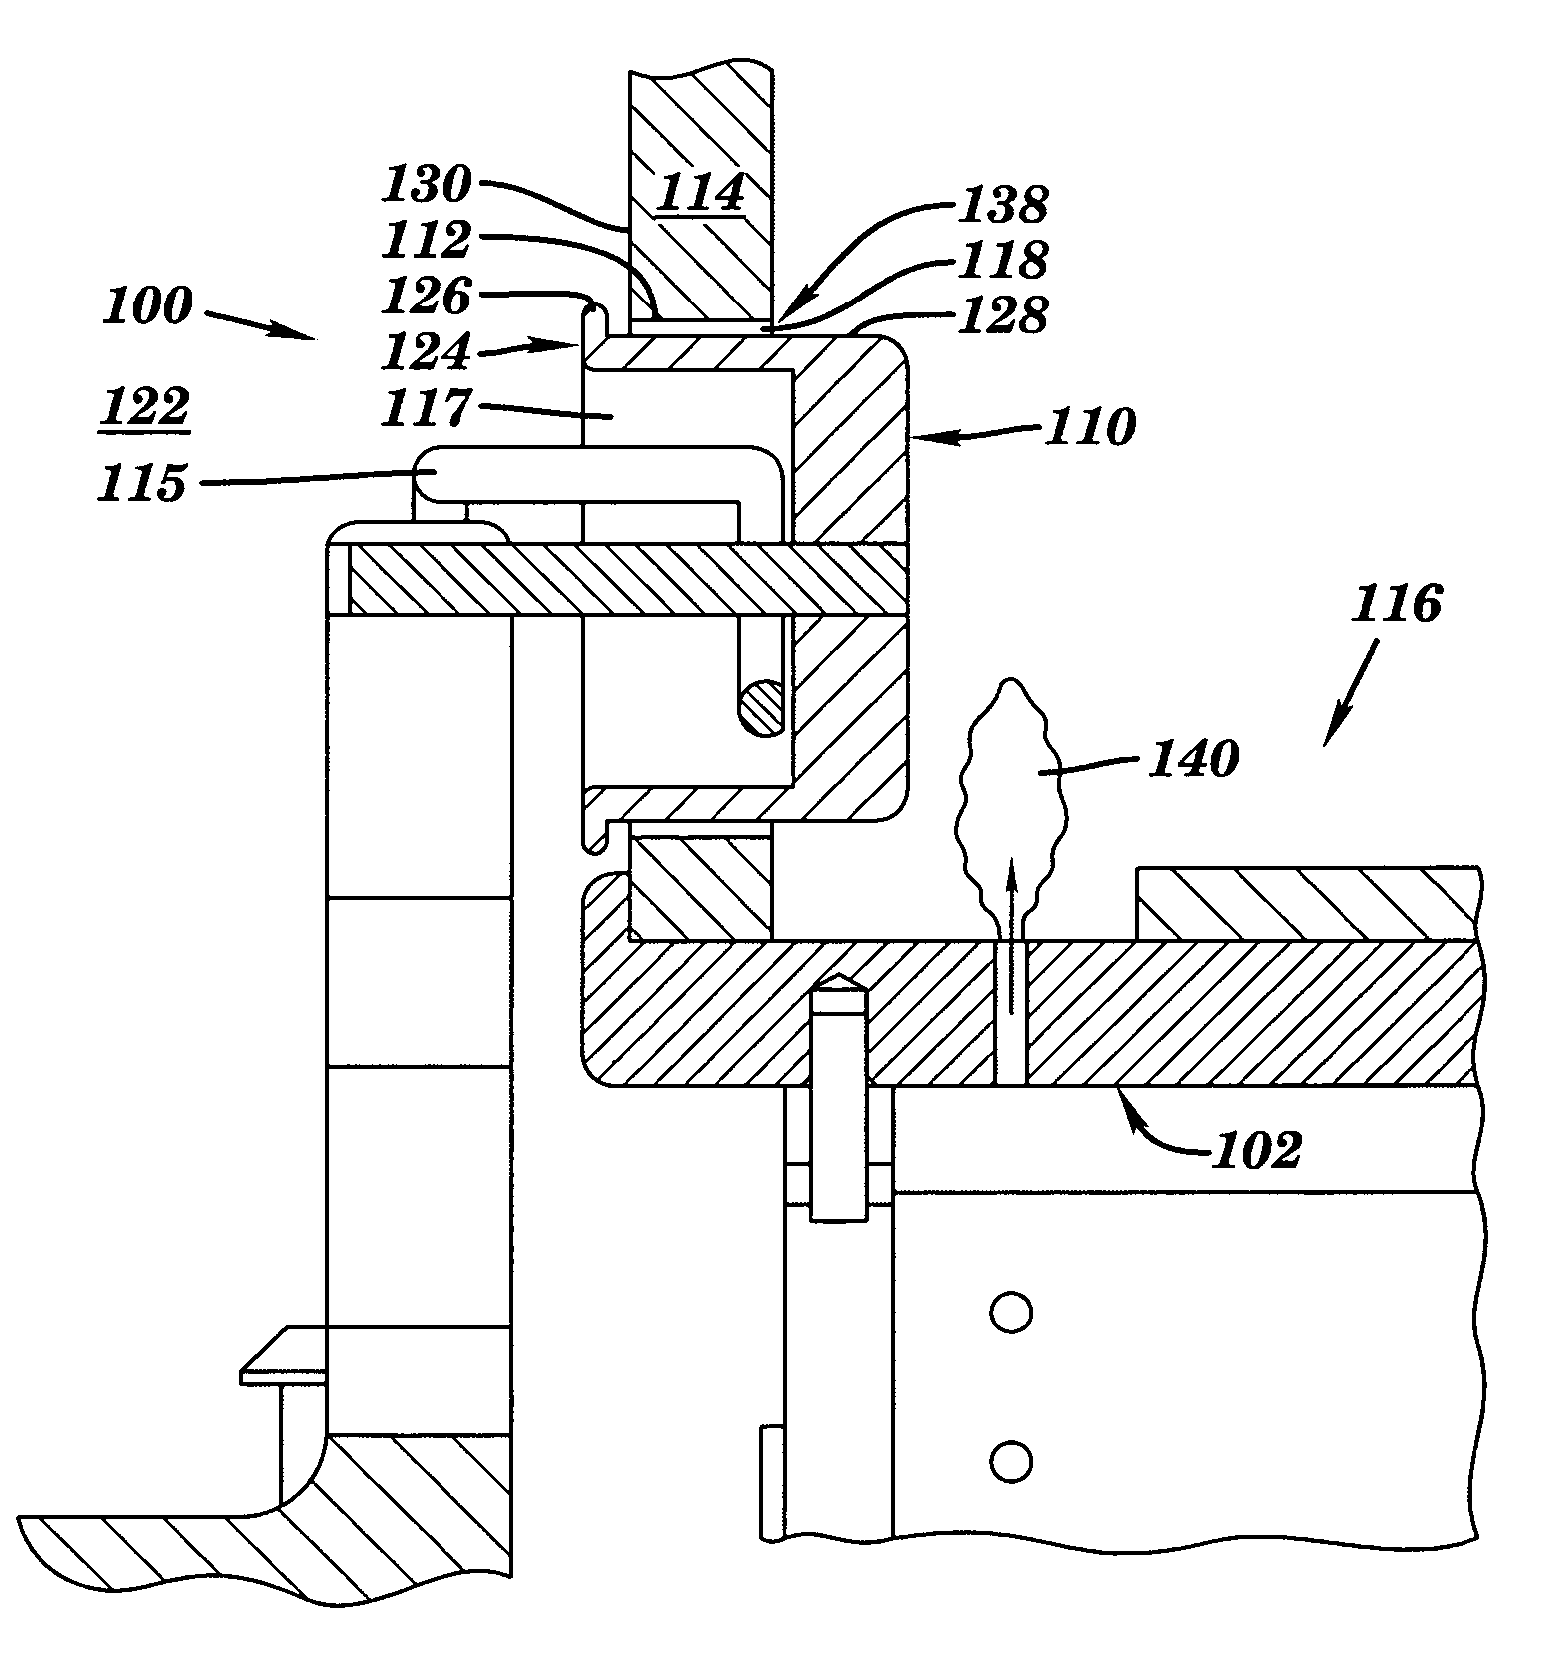 Gas flow restricting cathode system for ion implanter and related method